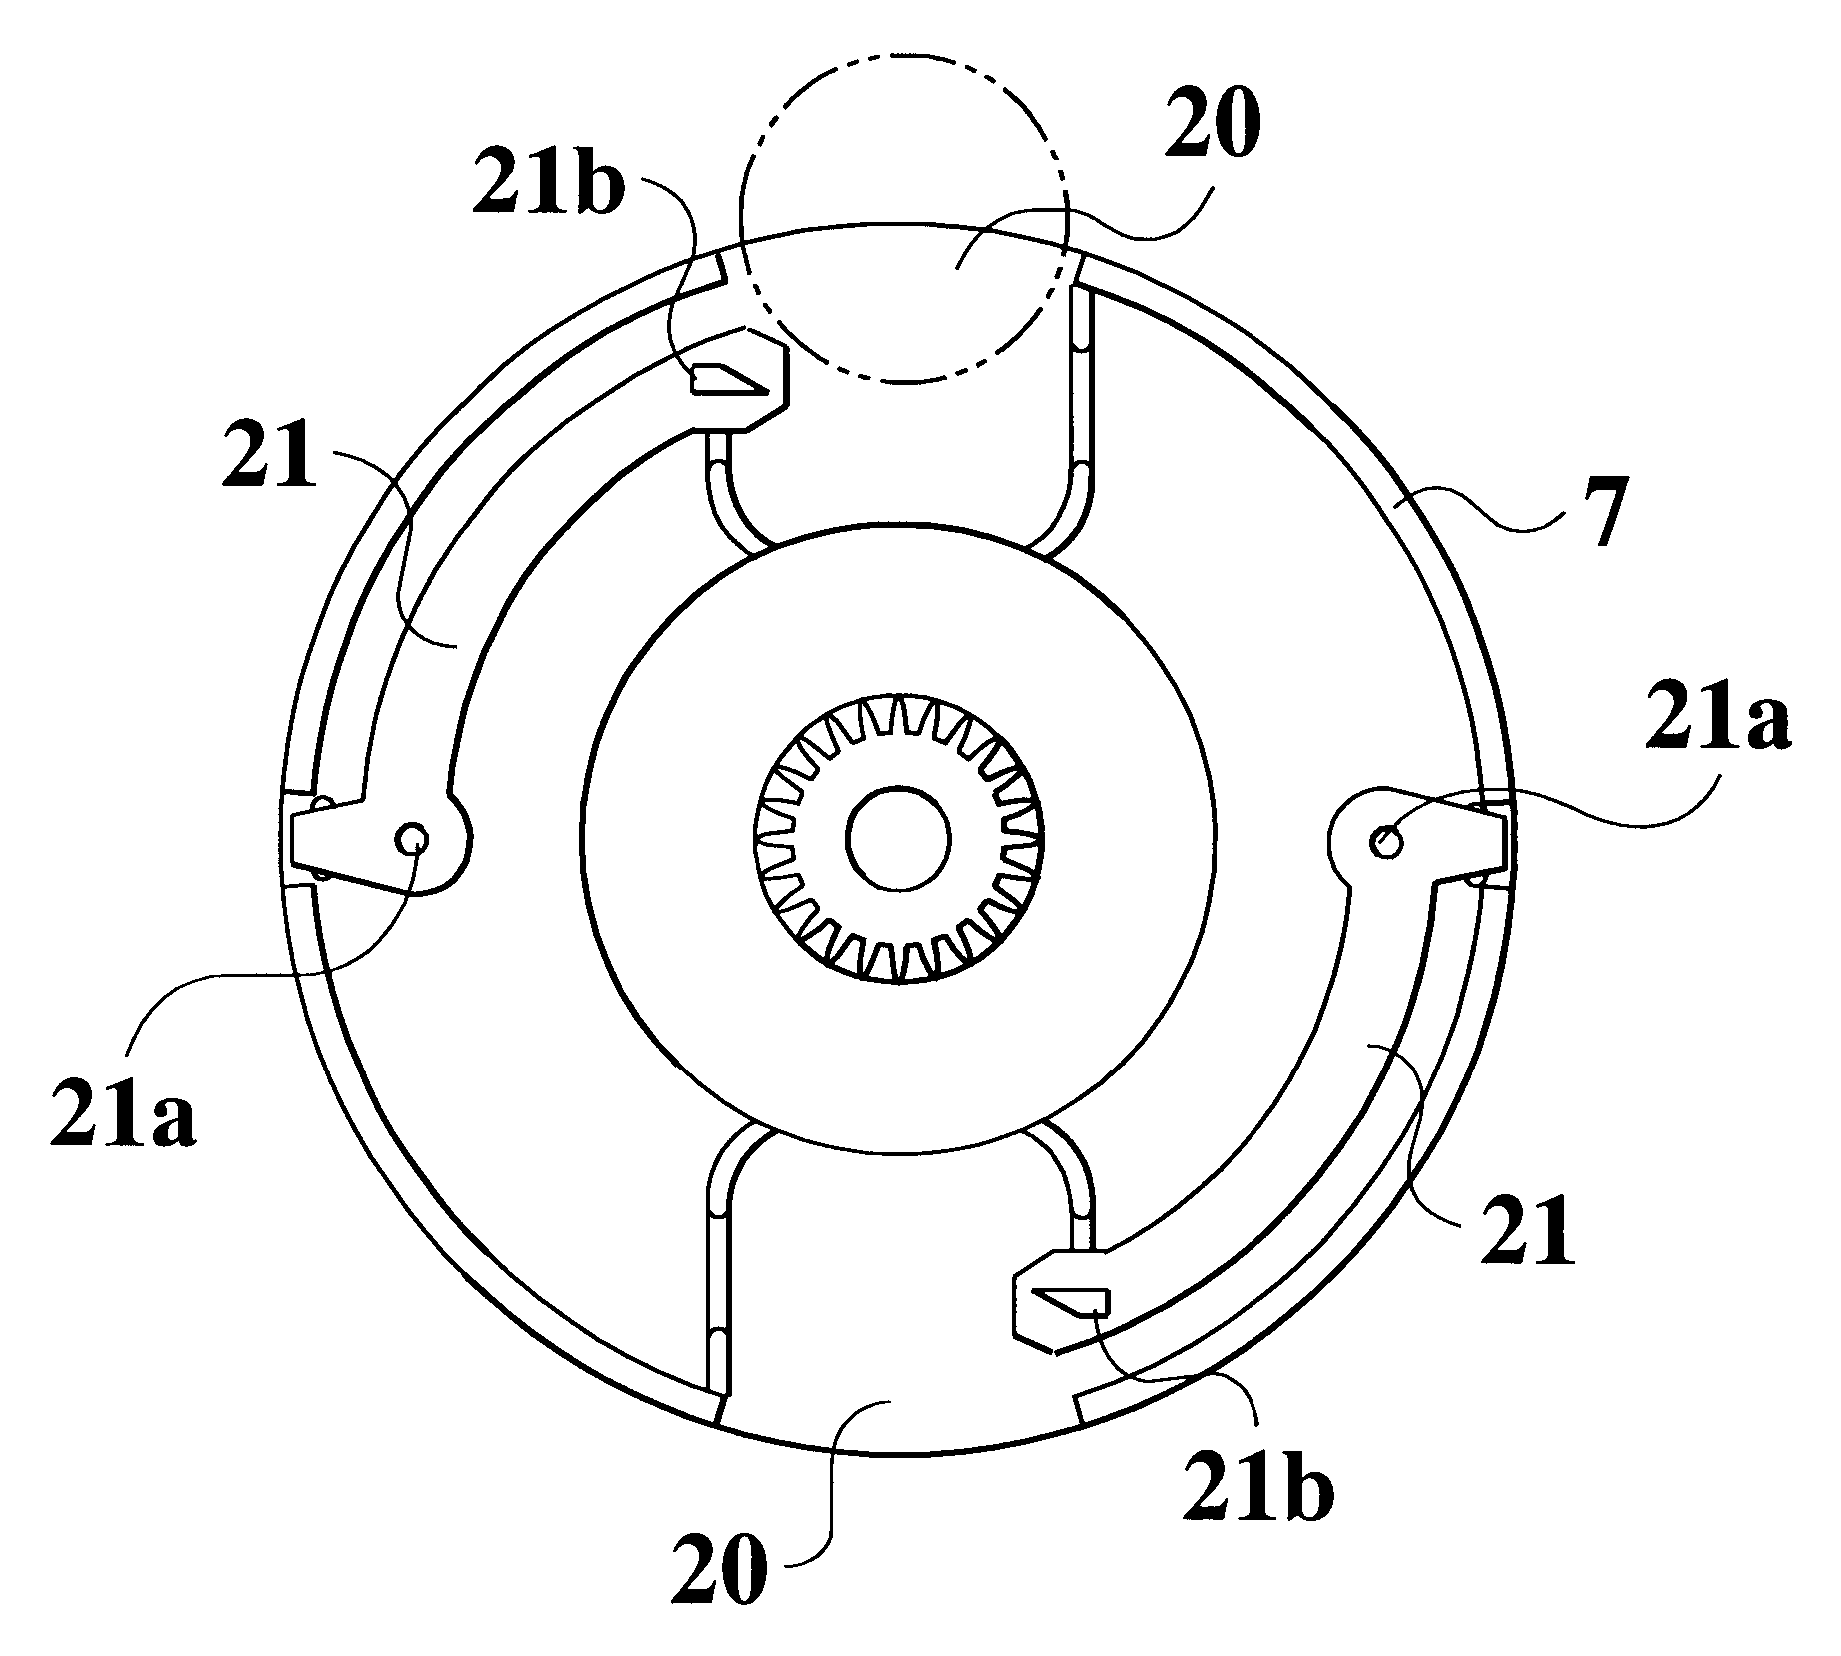 Coin sorting device, commodity discharging device, and game device